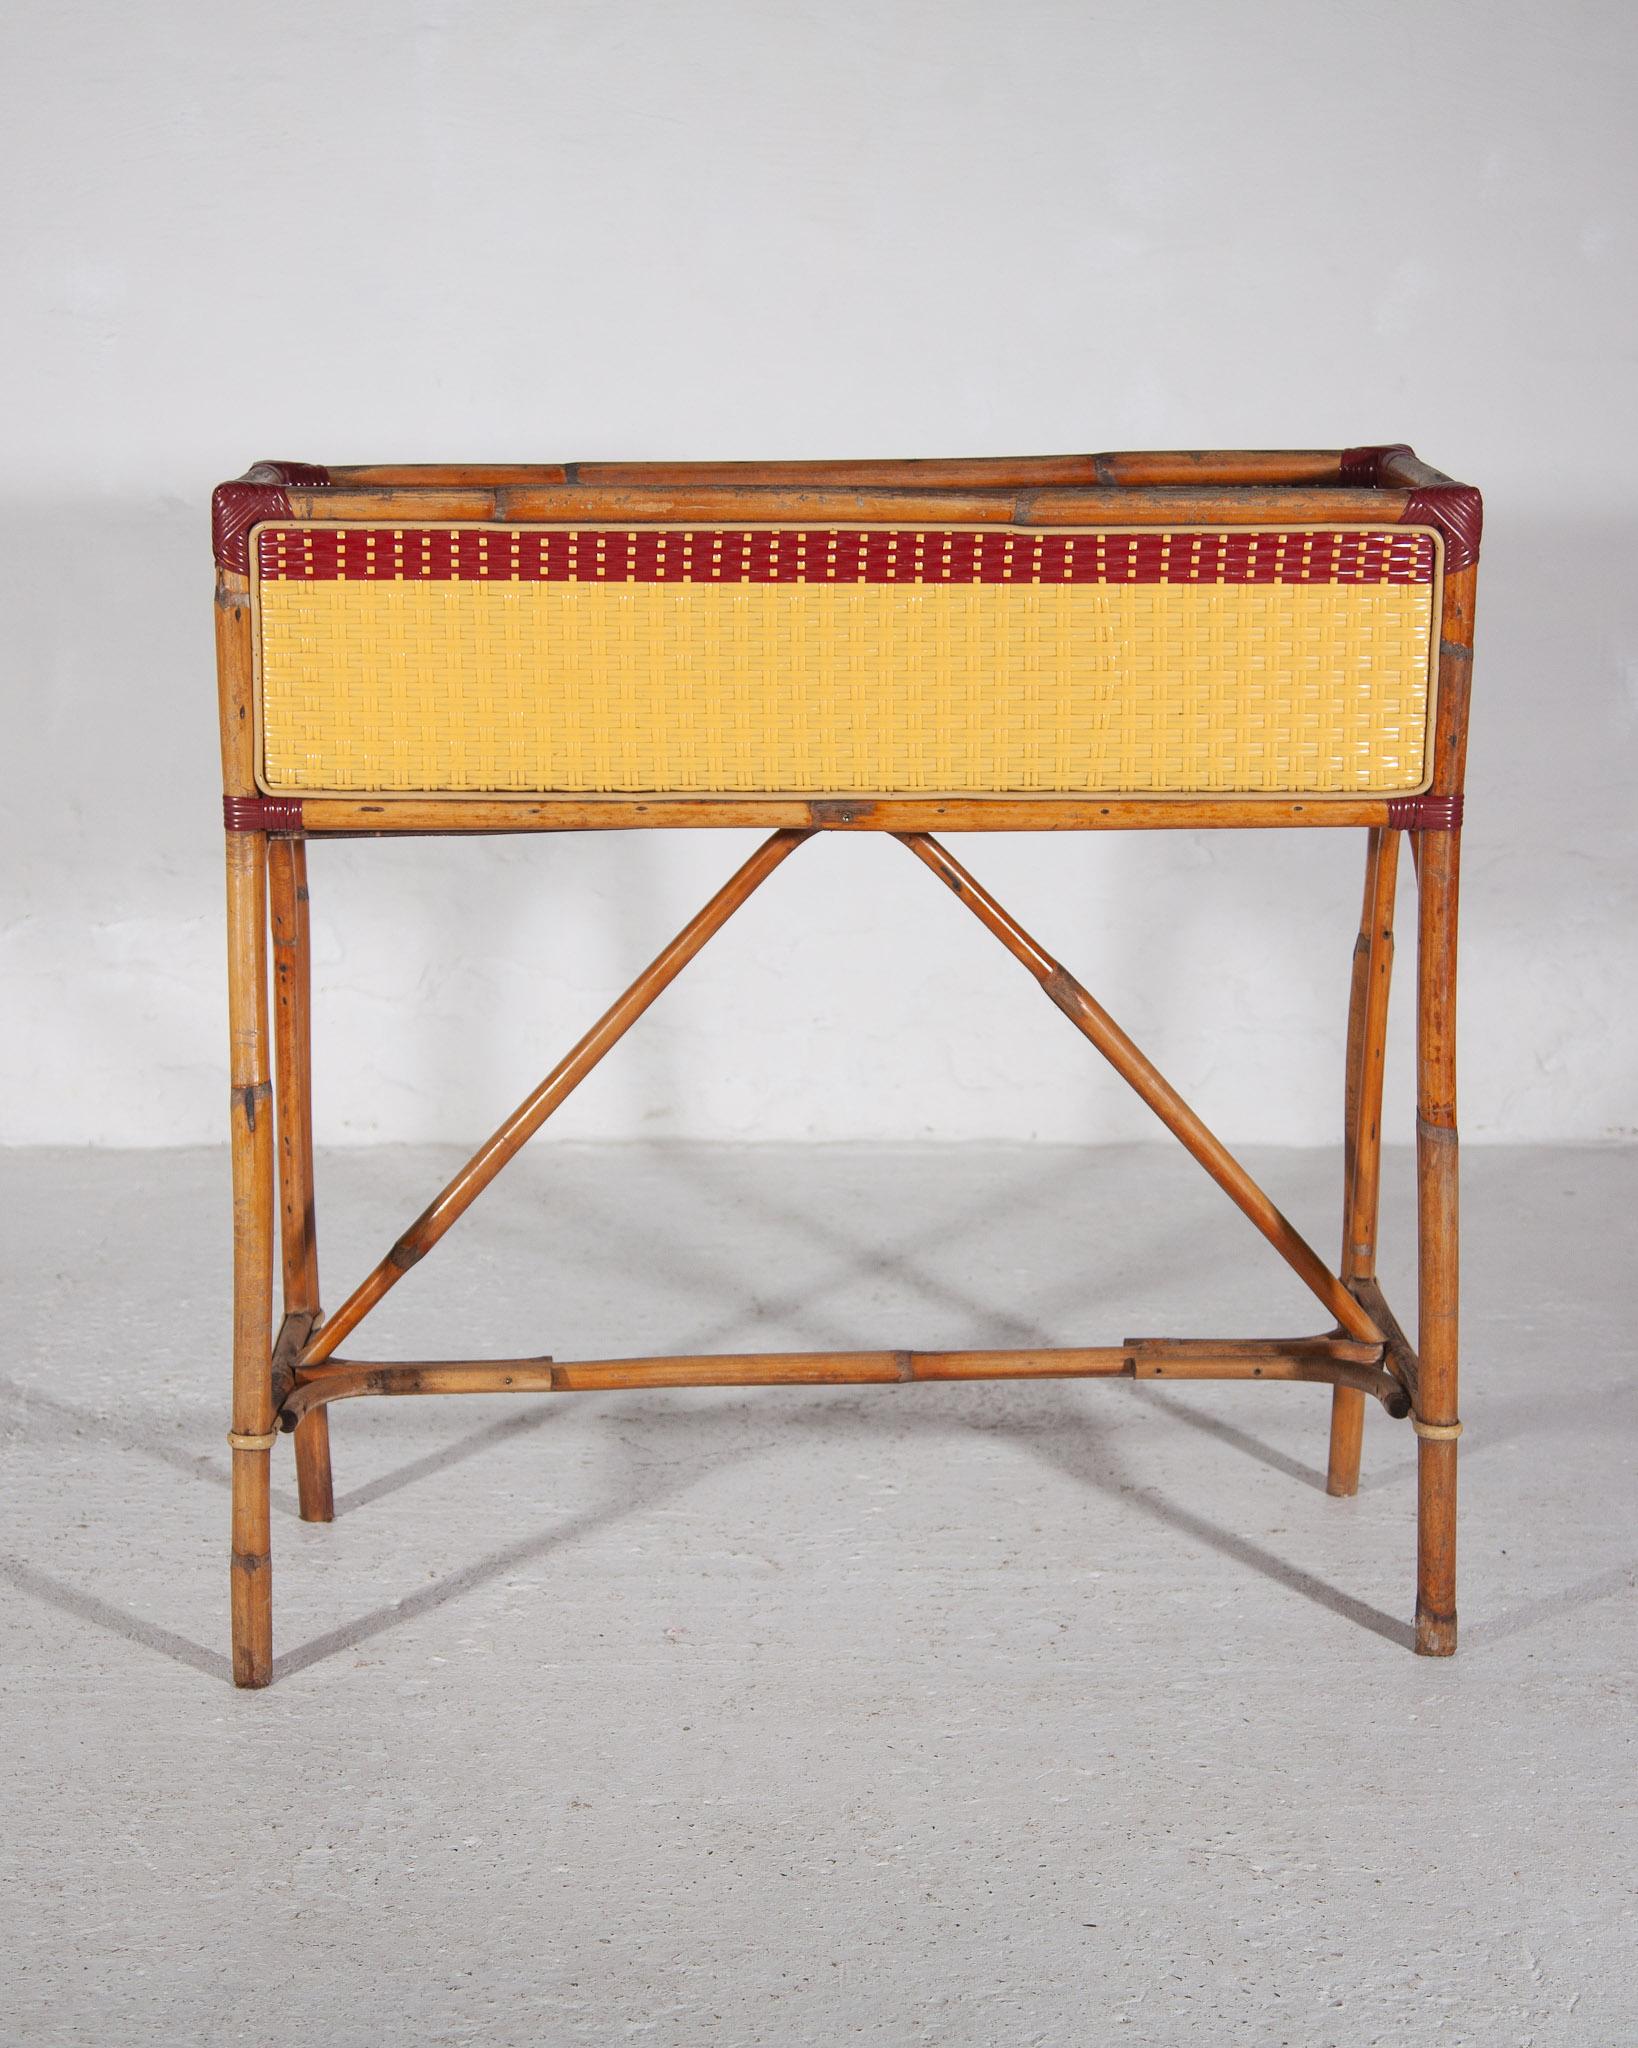 Set of  twoFrench bamboo rattan planters by Maison Gatti, 1950s made from one piece of hand-shaped bamboo frame and a rectangular planter with decorative geometric woven resin red and yellow stripes. Handcrafted made by Parisian artisans since 1920.